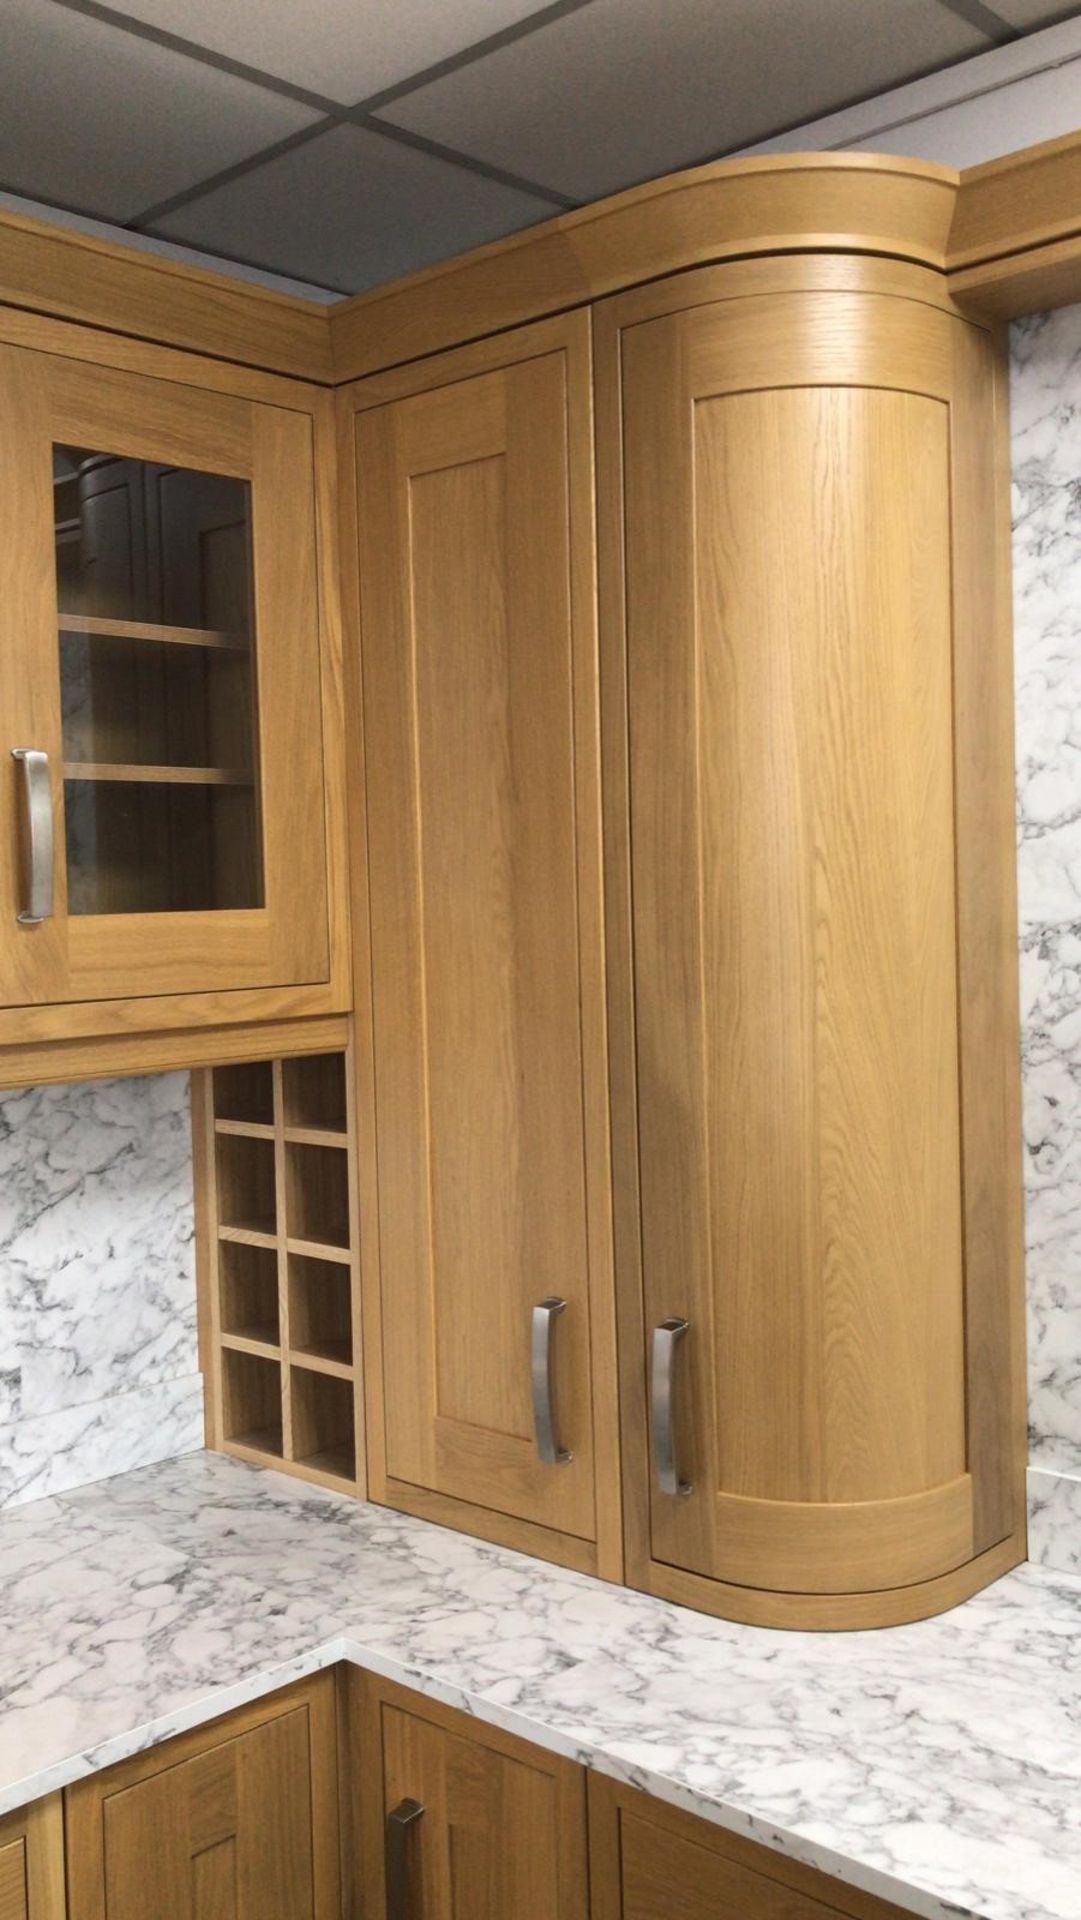 Circa 5000+ items Solid oak inframe kitchen doors inc over 100 curved doors etc, circa 87 pallets (2 - Image 5 of 15